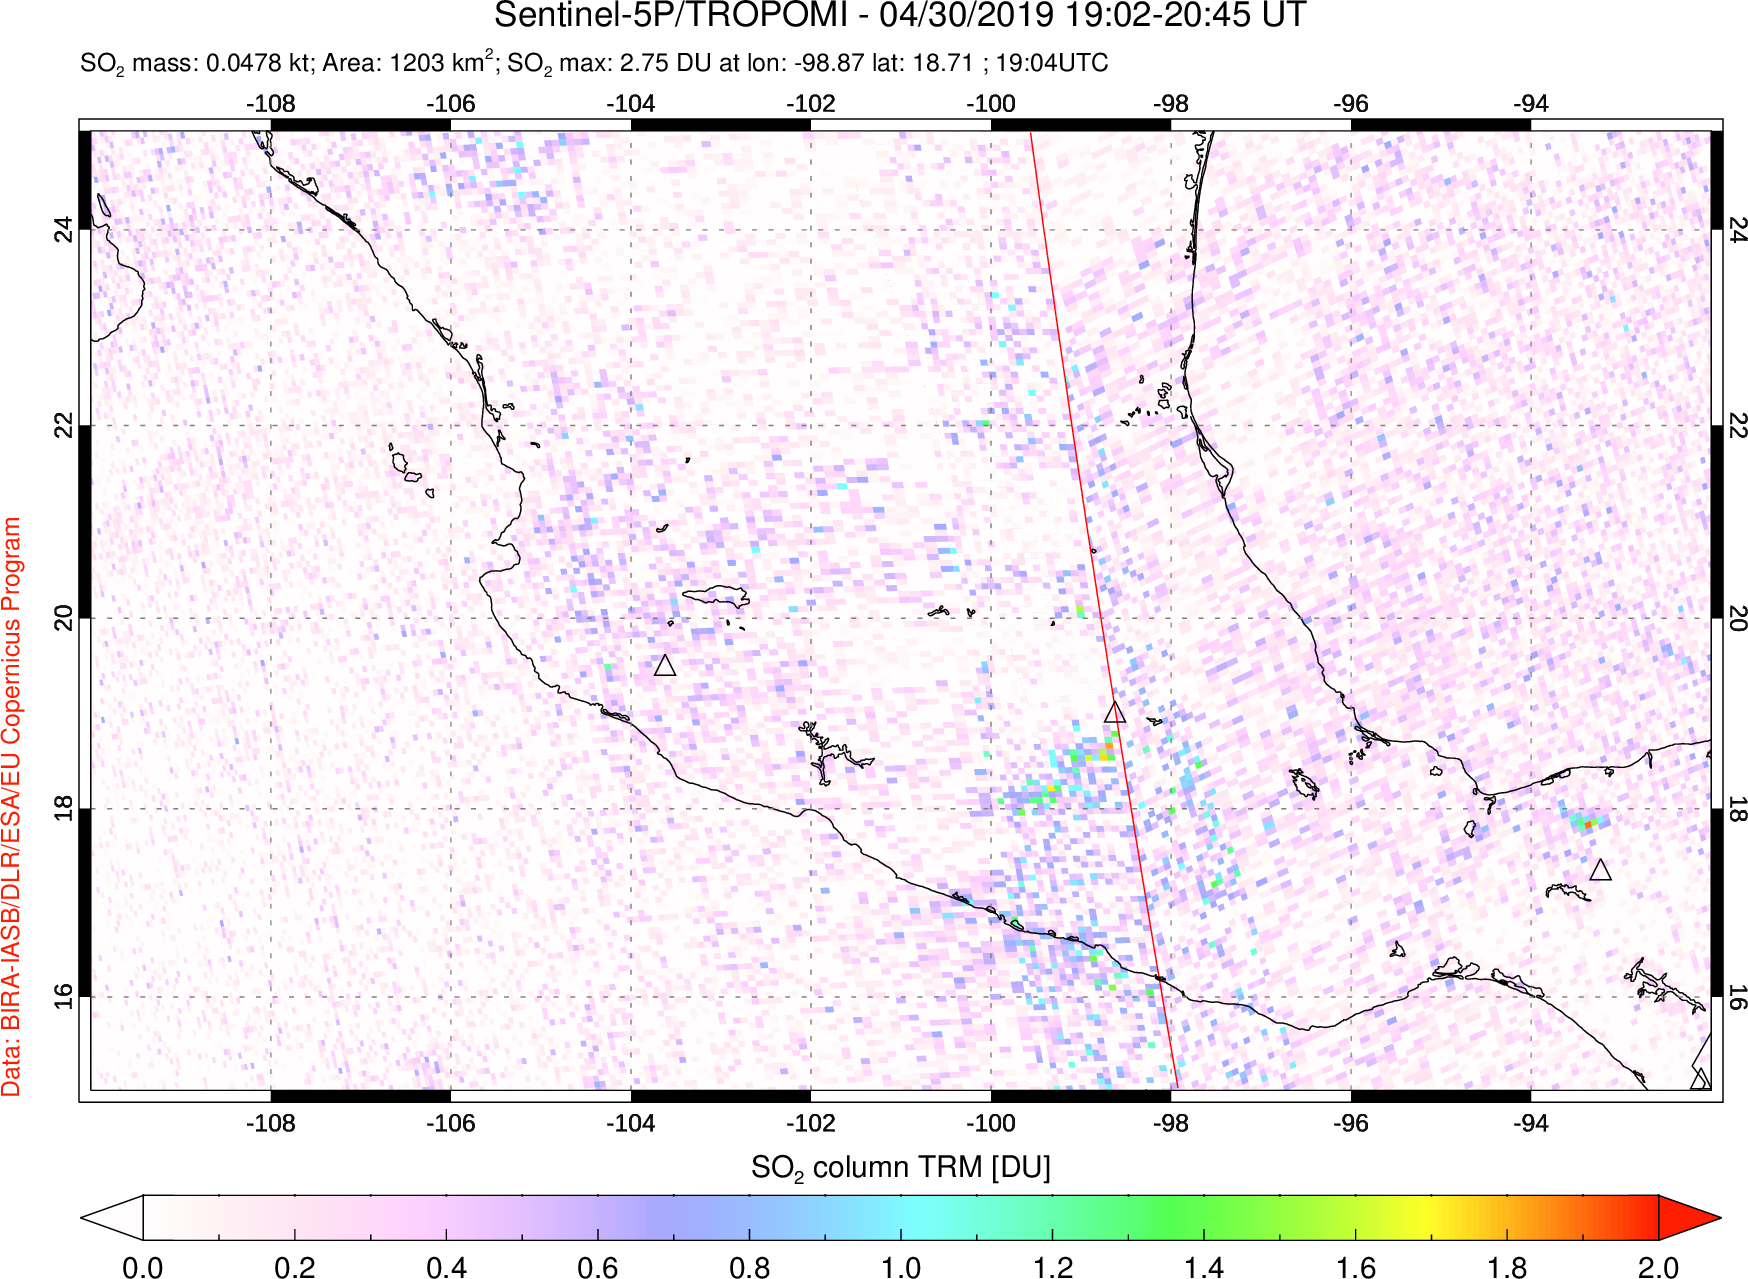 A sulfur dioxide image over Mexico on Apr 30, 2019.